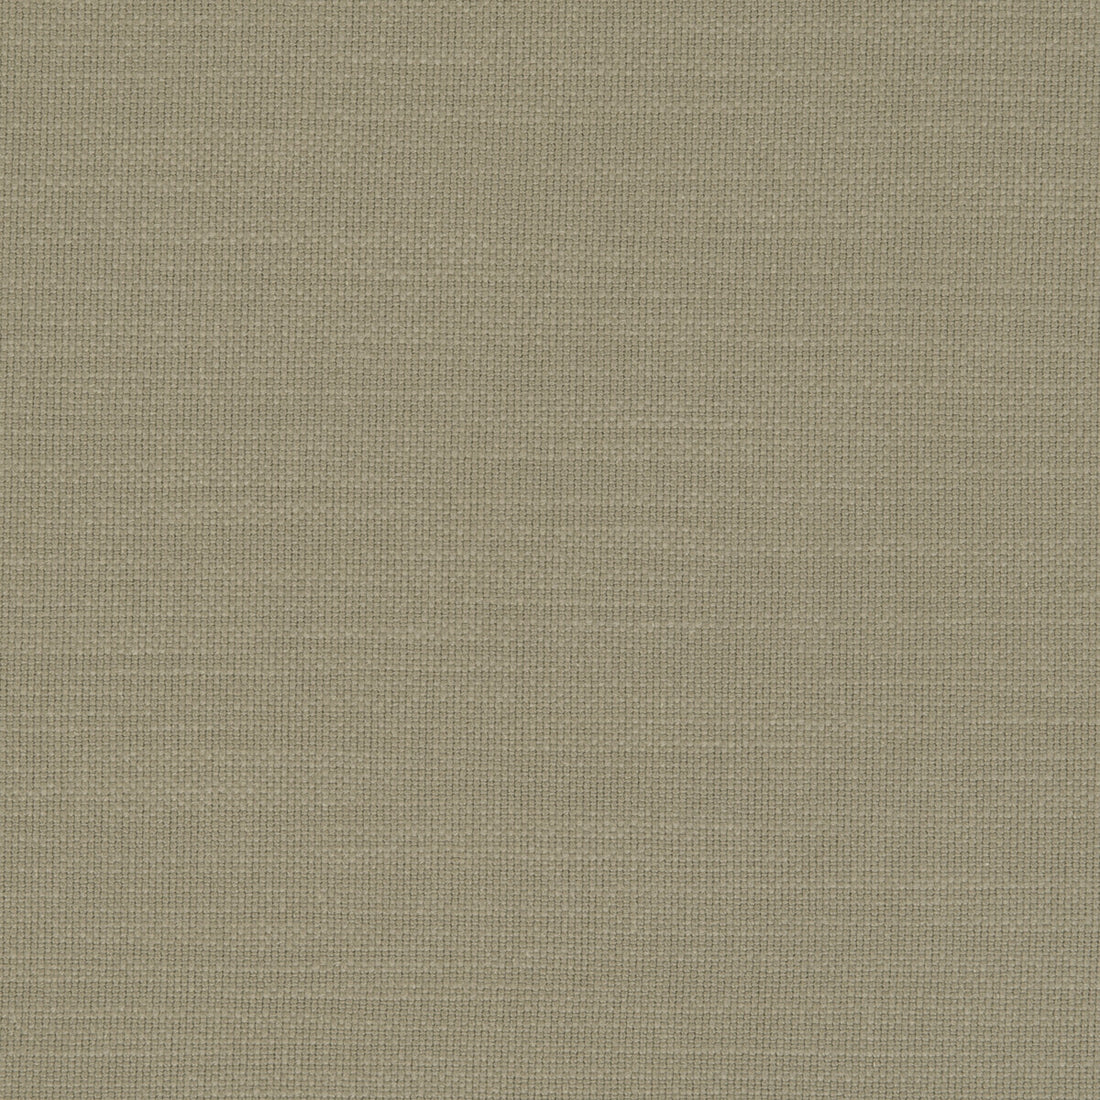 Nantucket fabric in eucalyptus color - pattern F0594/19.CAC.0 - by Clarke And Clarke in the Clarke &amp; Clarke Nantucket collection